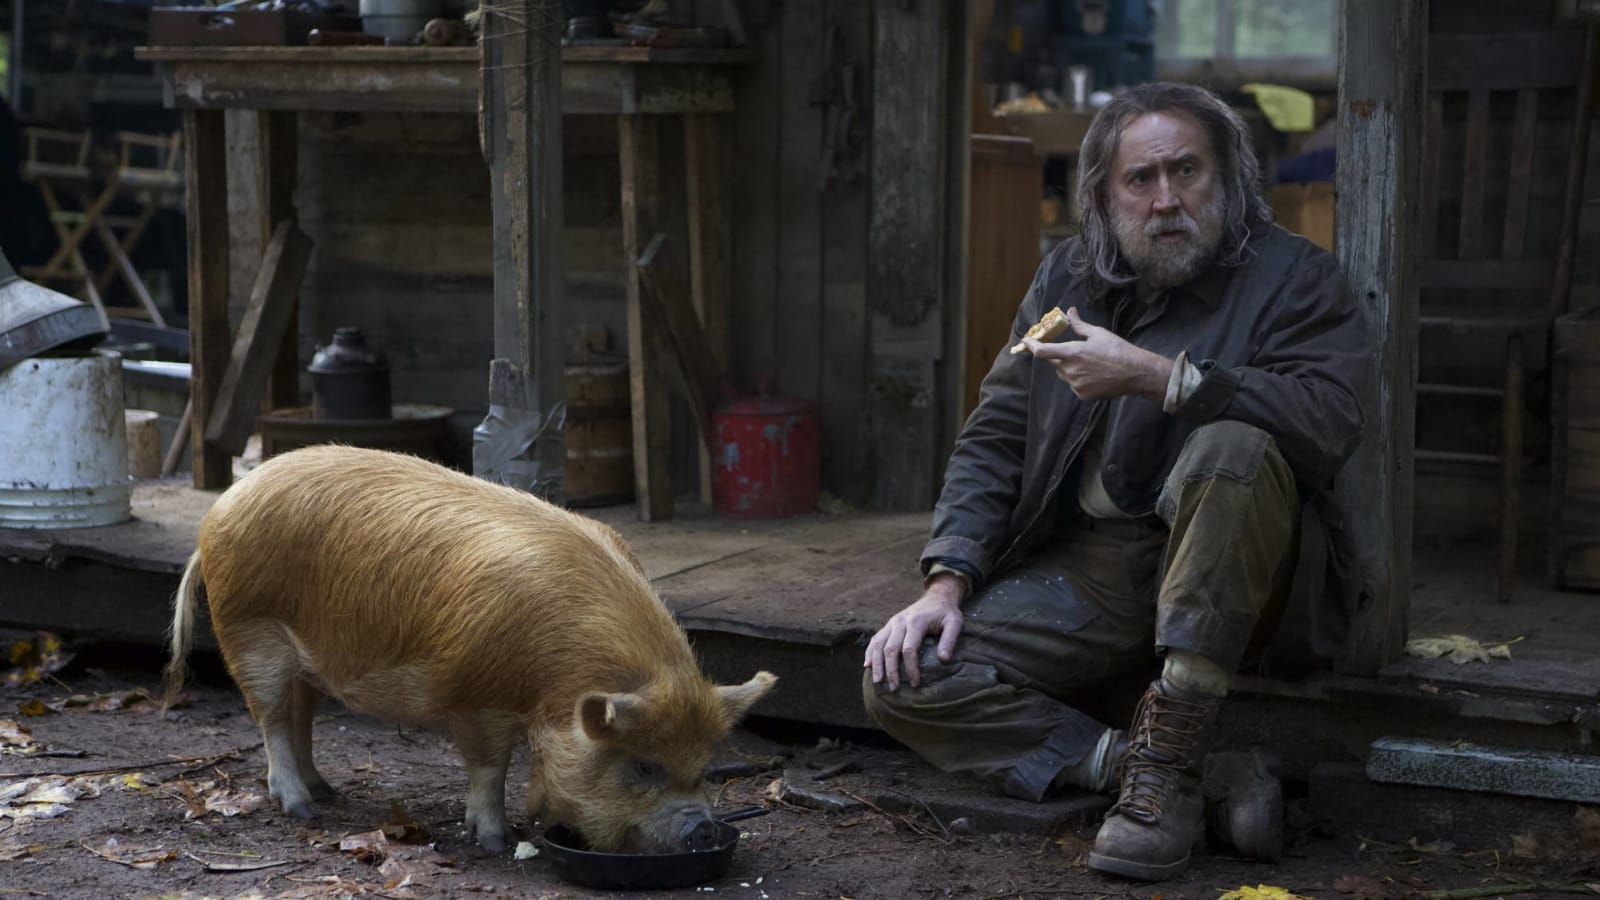 Nicolas Cage 'will never see' his new film 'Pig': 'That's too bizarre'